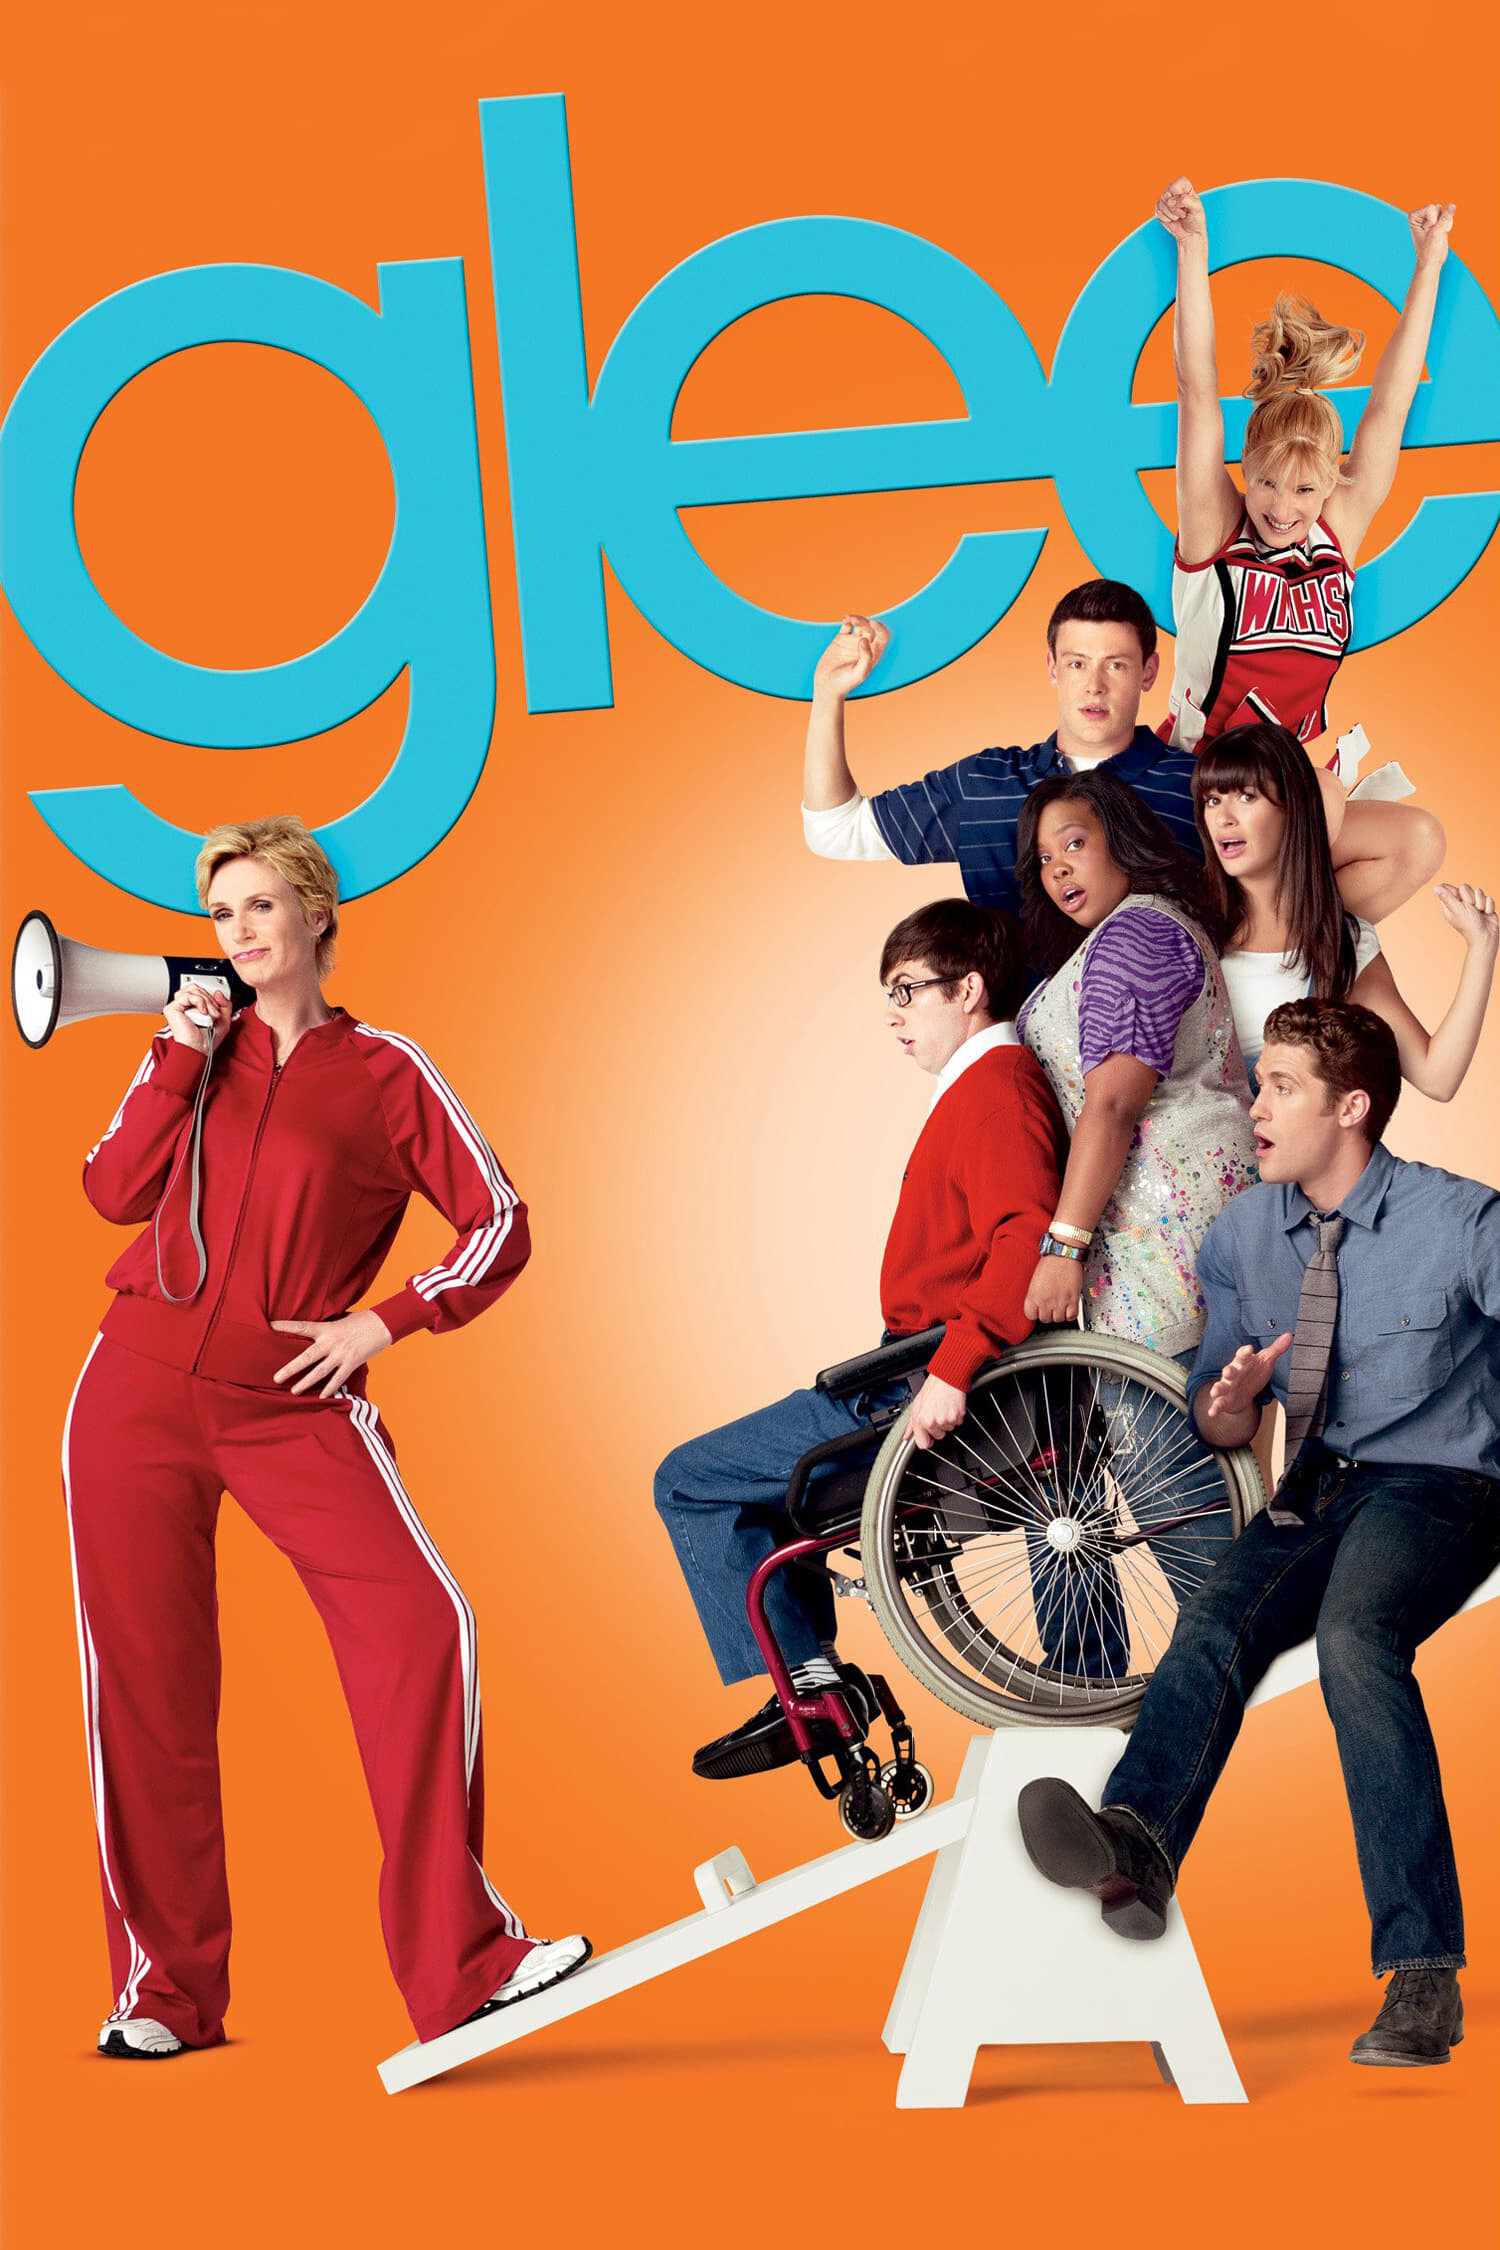 Glee (TV series): Musical comedy-drama about the misfits who make up a high-school choir group. 1500x2250 HD Wallpaper.